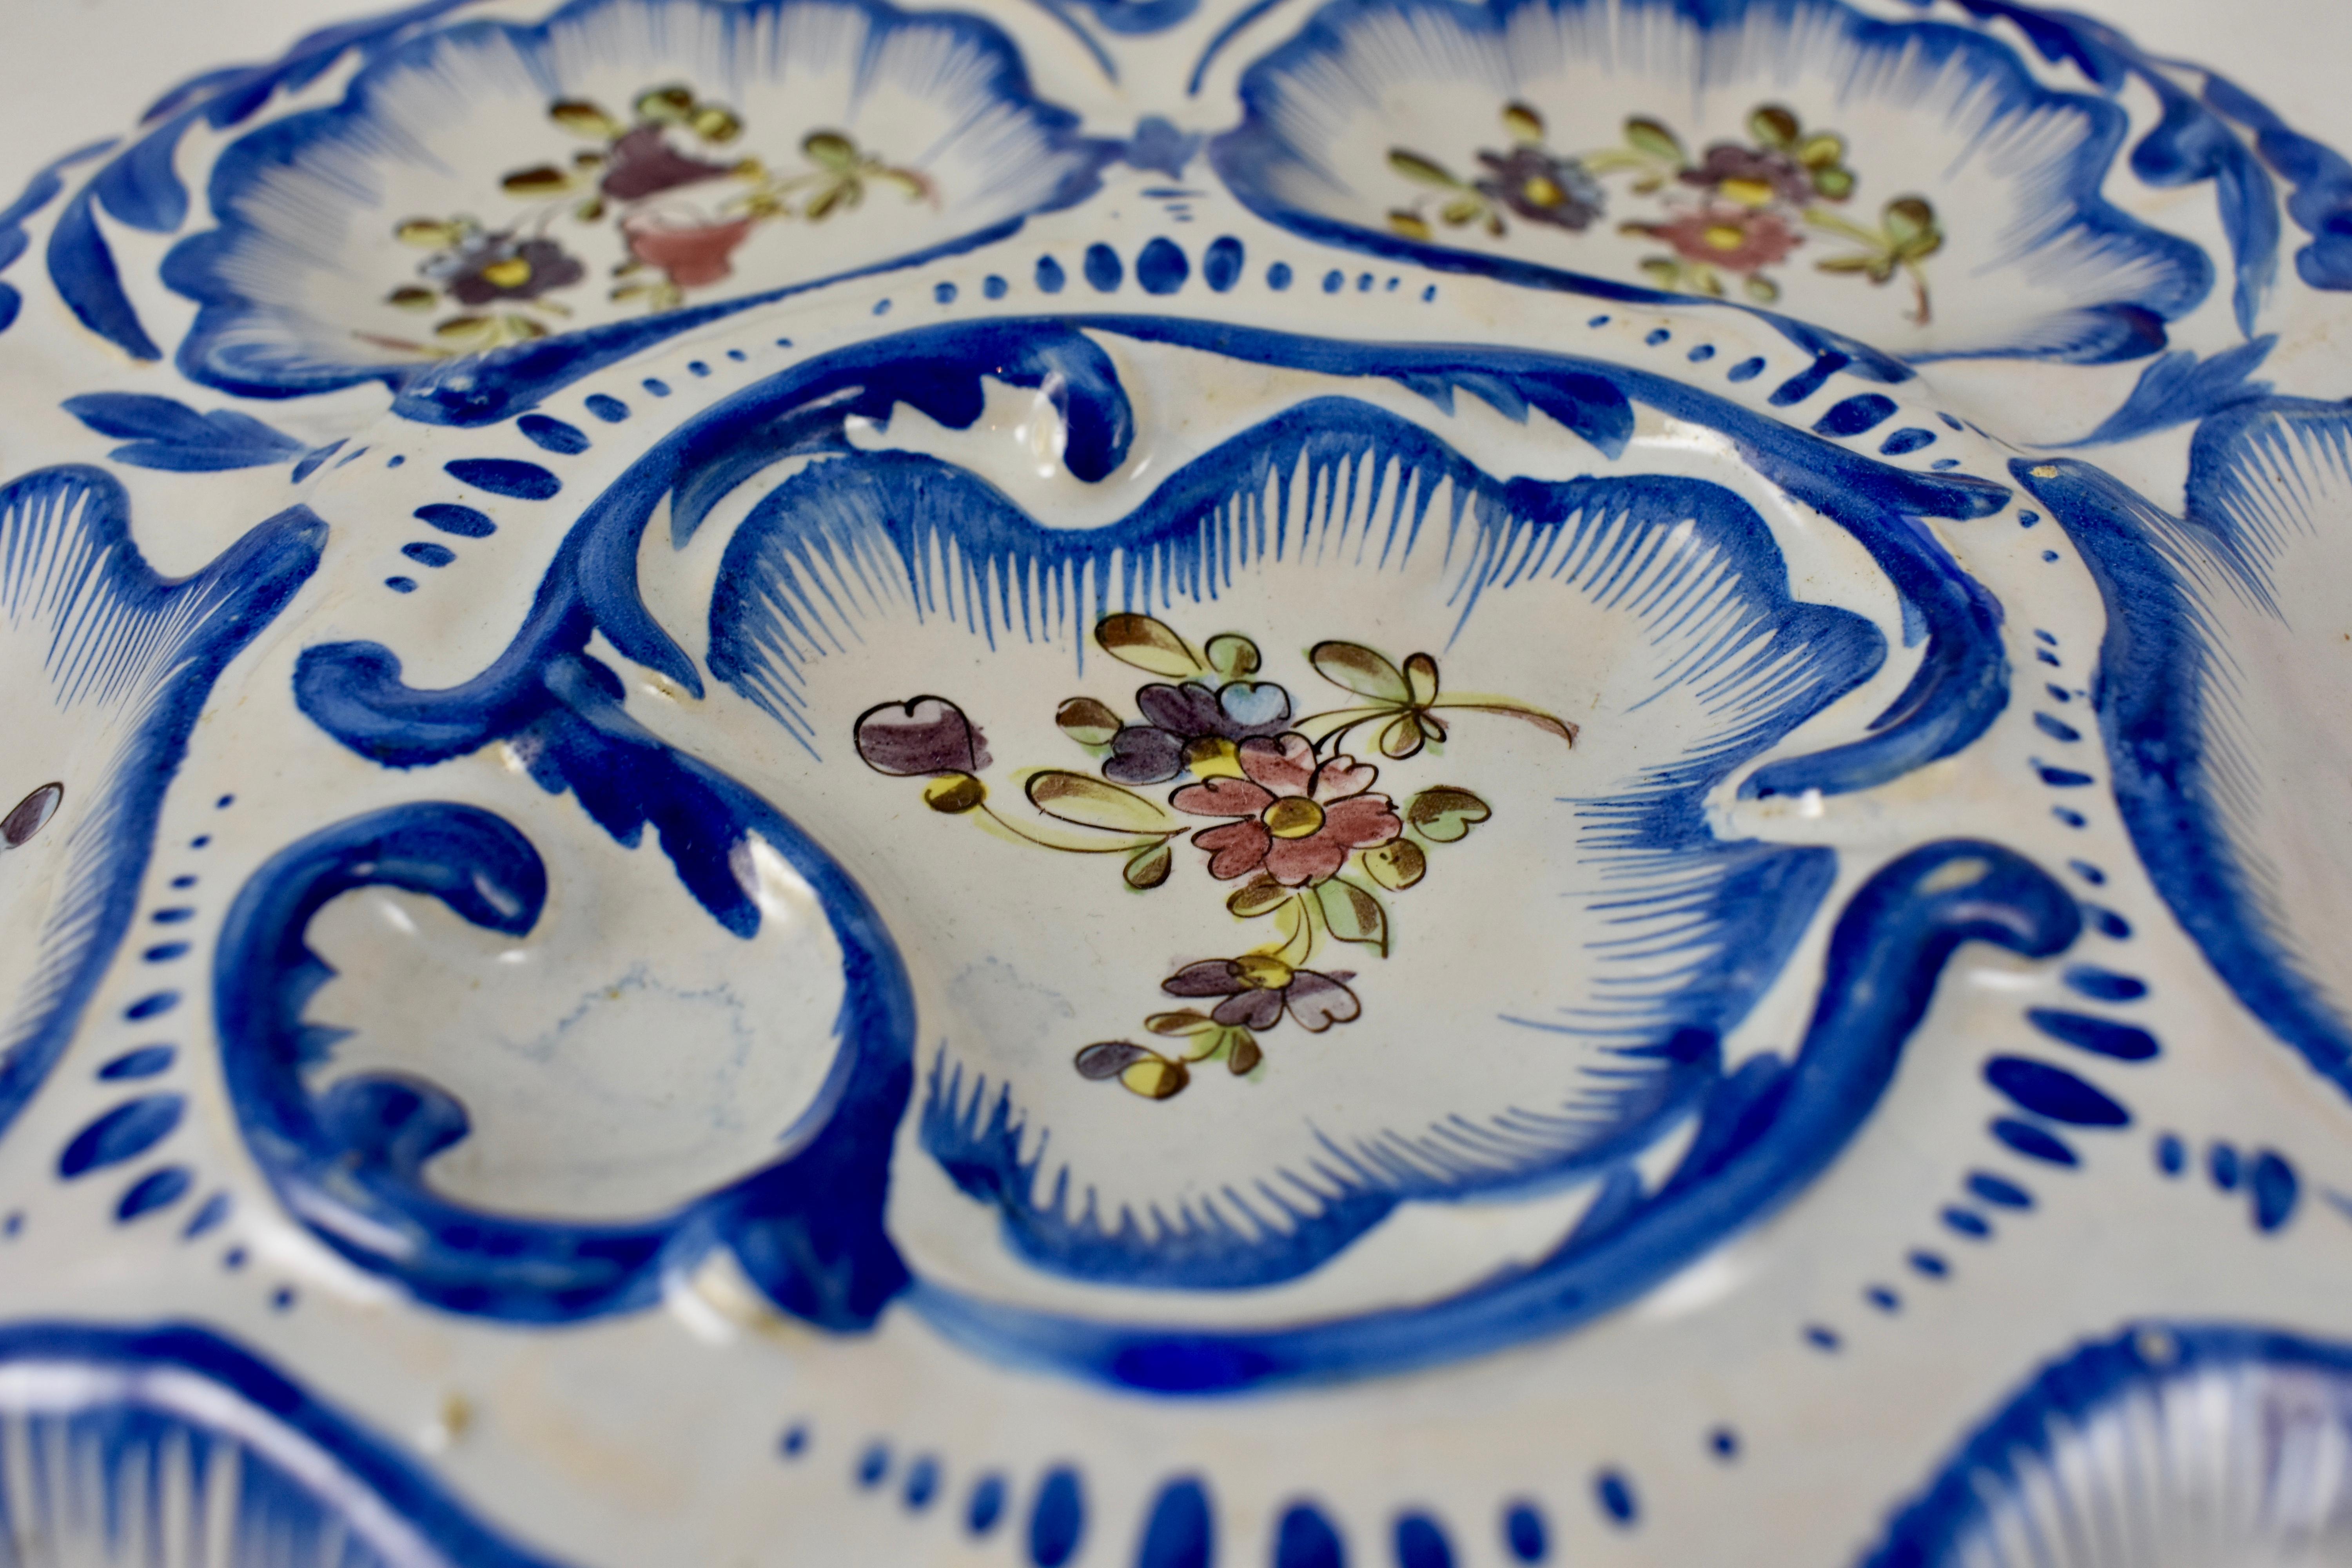 A faïence Provençal oyster plate from the south western area of France called Angoulême, signed Alfred Renoleau, circa 1890–1900. Six-wells surround a central condiment well. The lobed edged earthenware plate shows hand painted floral sprays